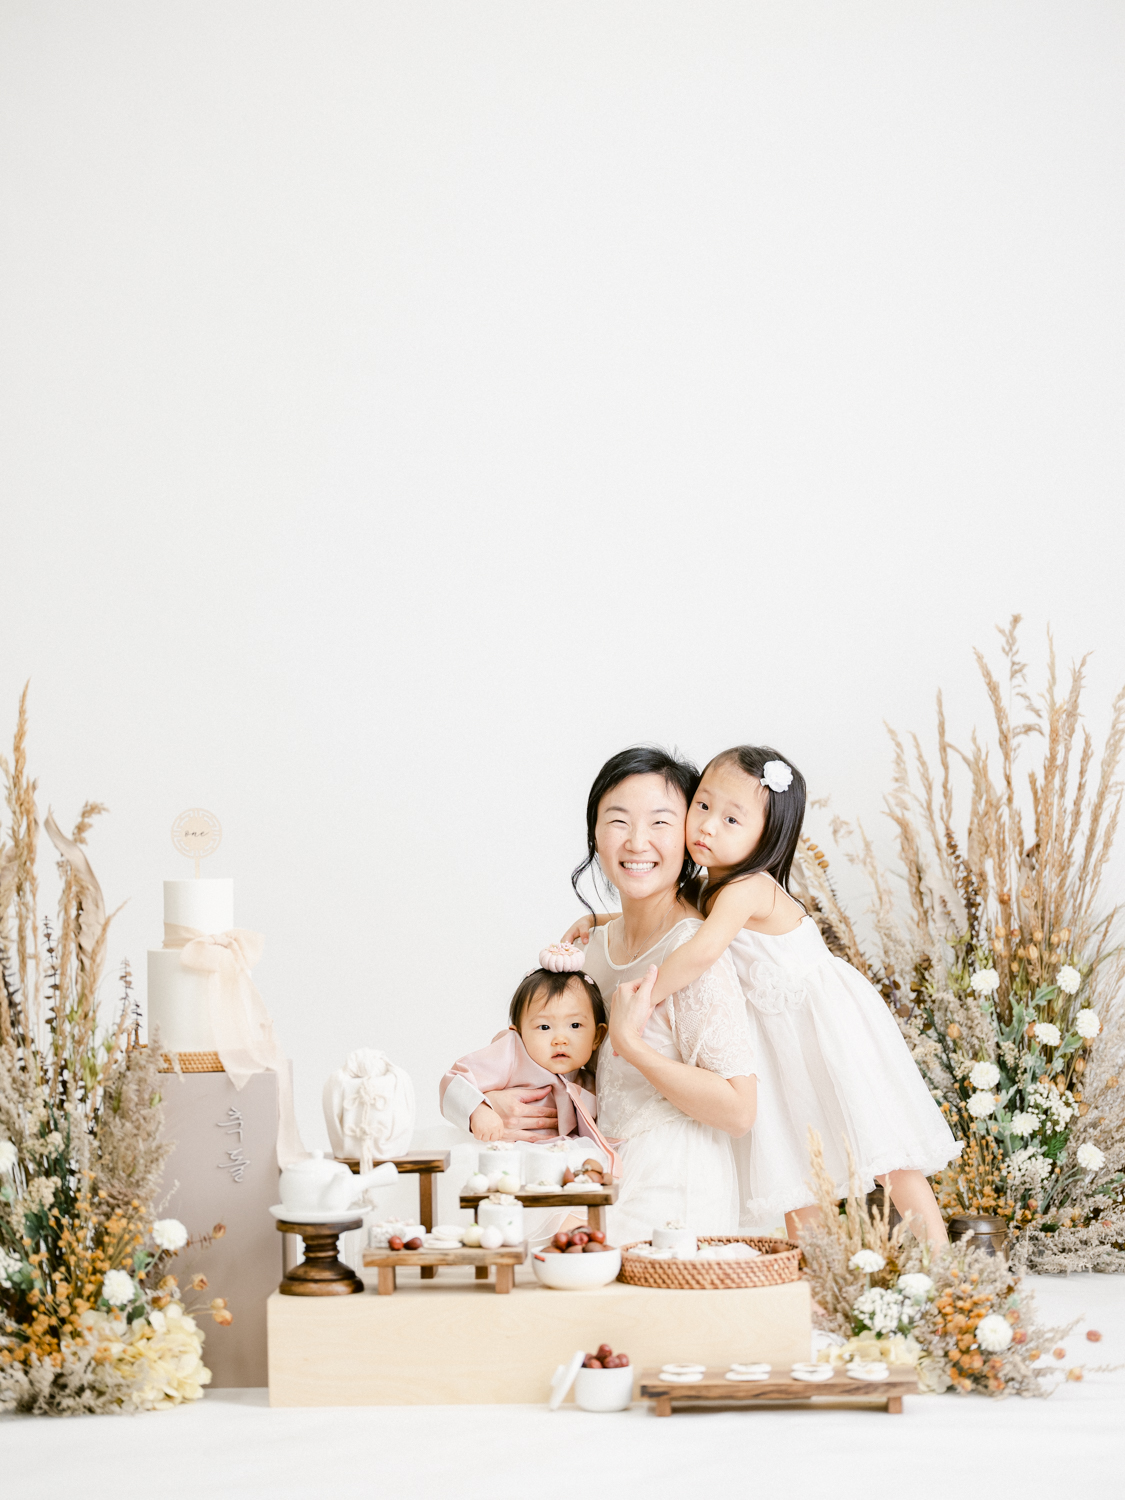 How to Celebrate Dol - Korean First Birthday Traditions Family Portrait